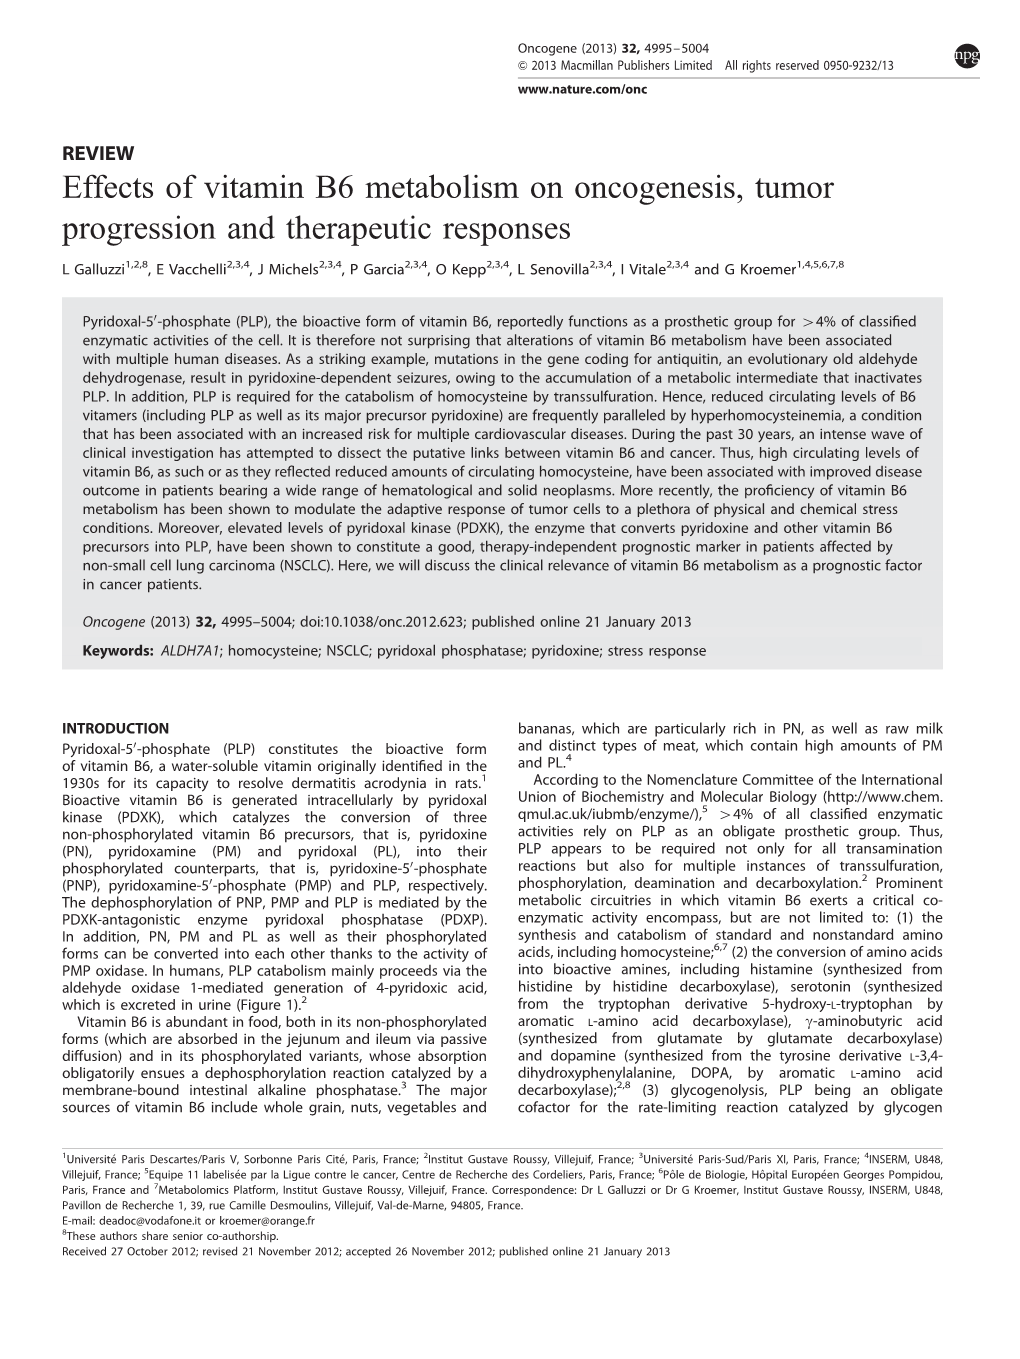 Effects of Vitamin B6 Metabolism on Oncogenesis, Tumor Progression and Therapeutic Responses